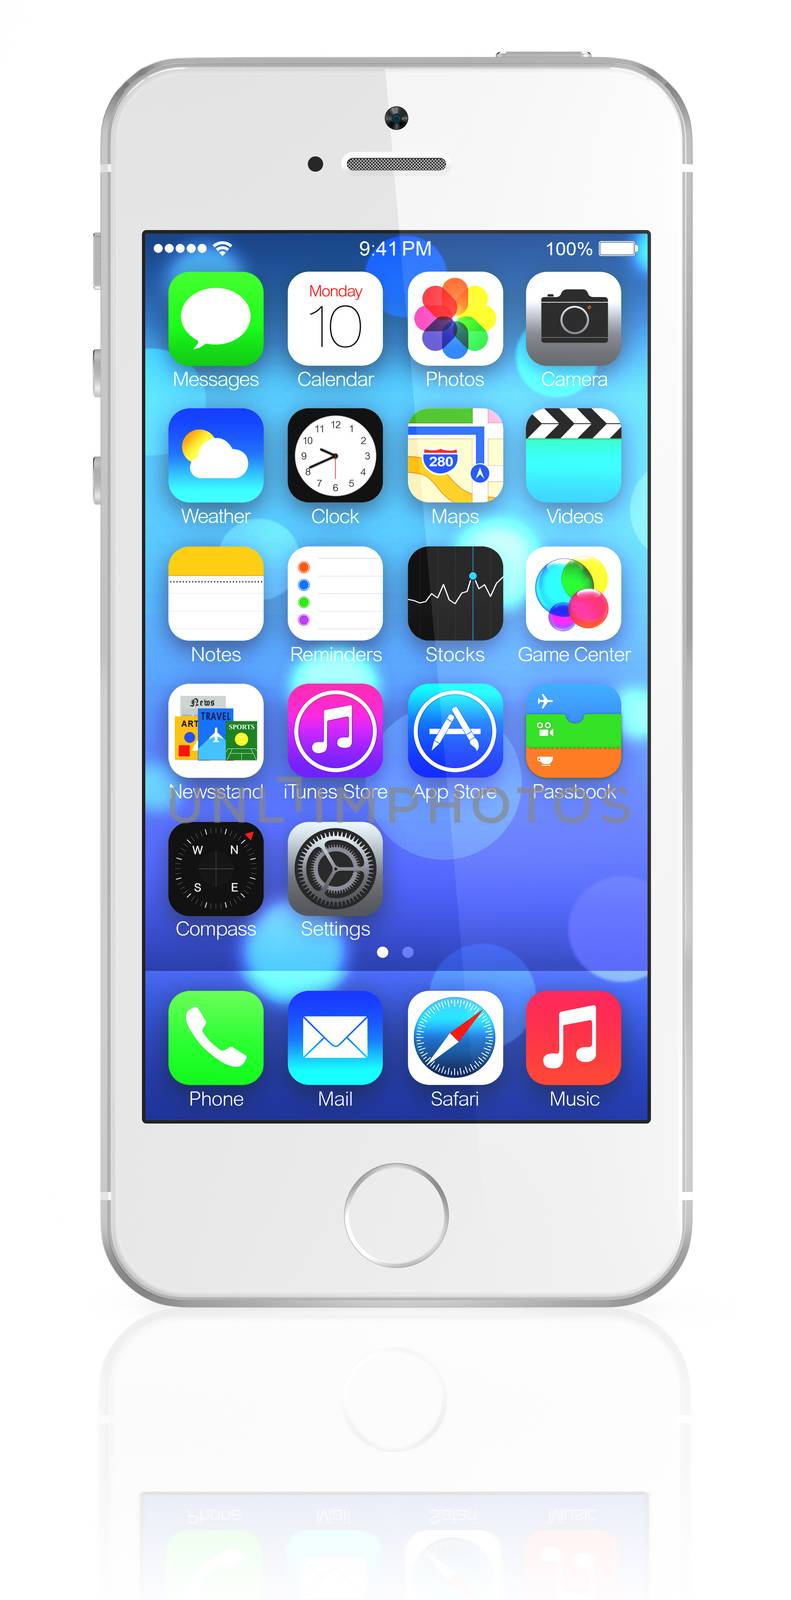 Galati, Romania - August 12, 2014: New Apple Silver iPhone 5s showing the home screen with iOS7. Some of the new features of the iPhone 5s include fingerprint recognition built into the home button, a new camera, and a 64-bit processor. Apple released the iPhone 5s on September 20, 2013.